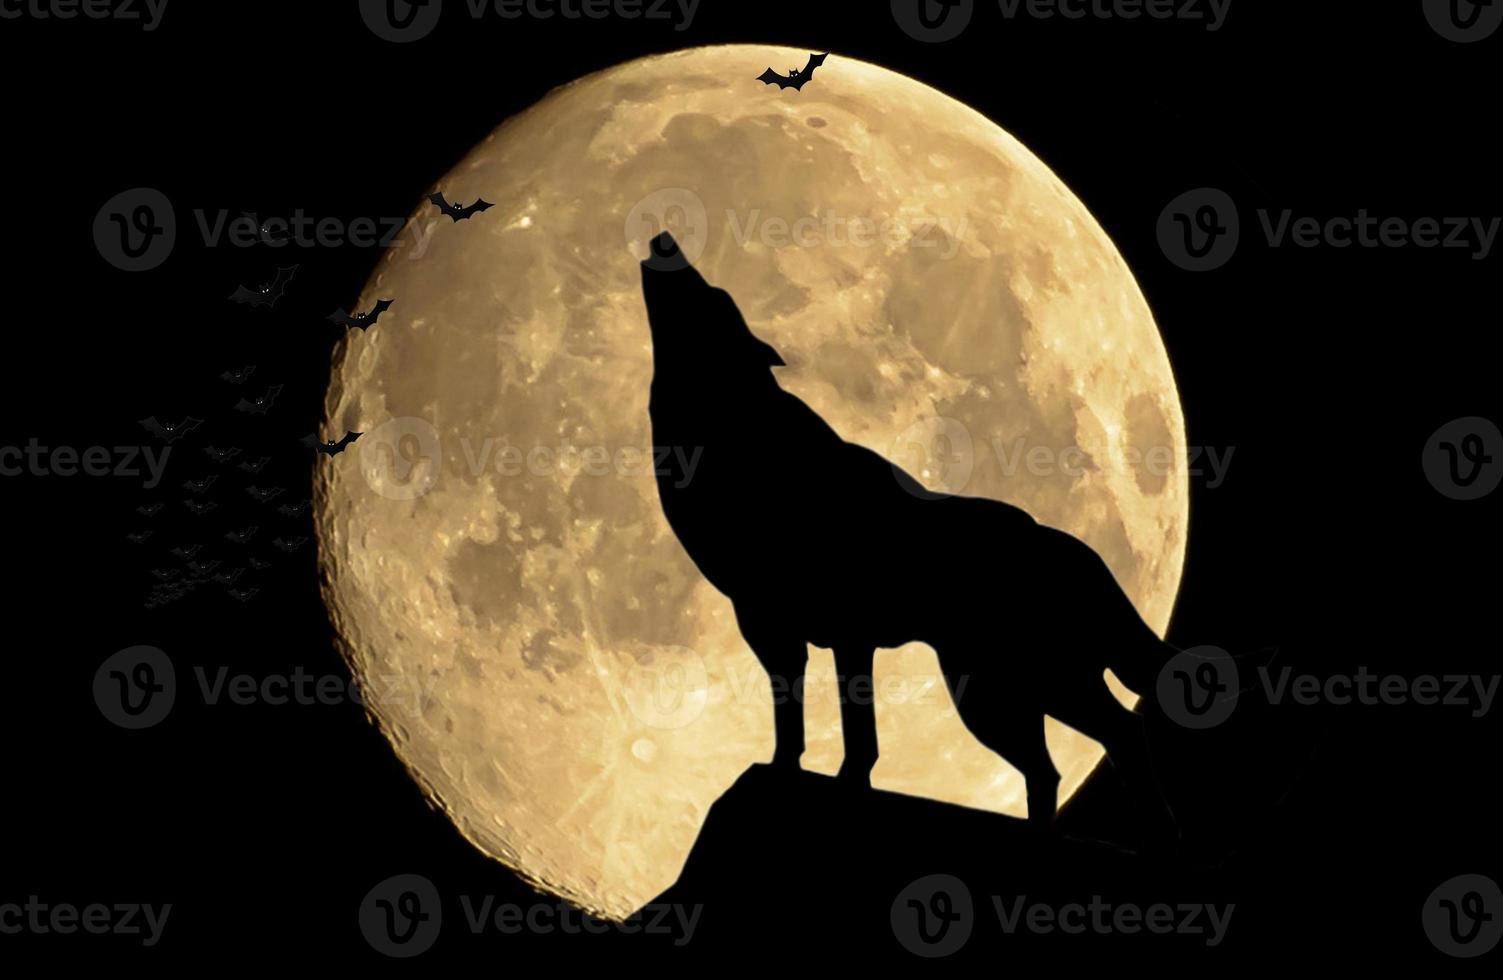 The wolf howling at the full moon photo